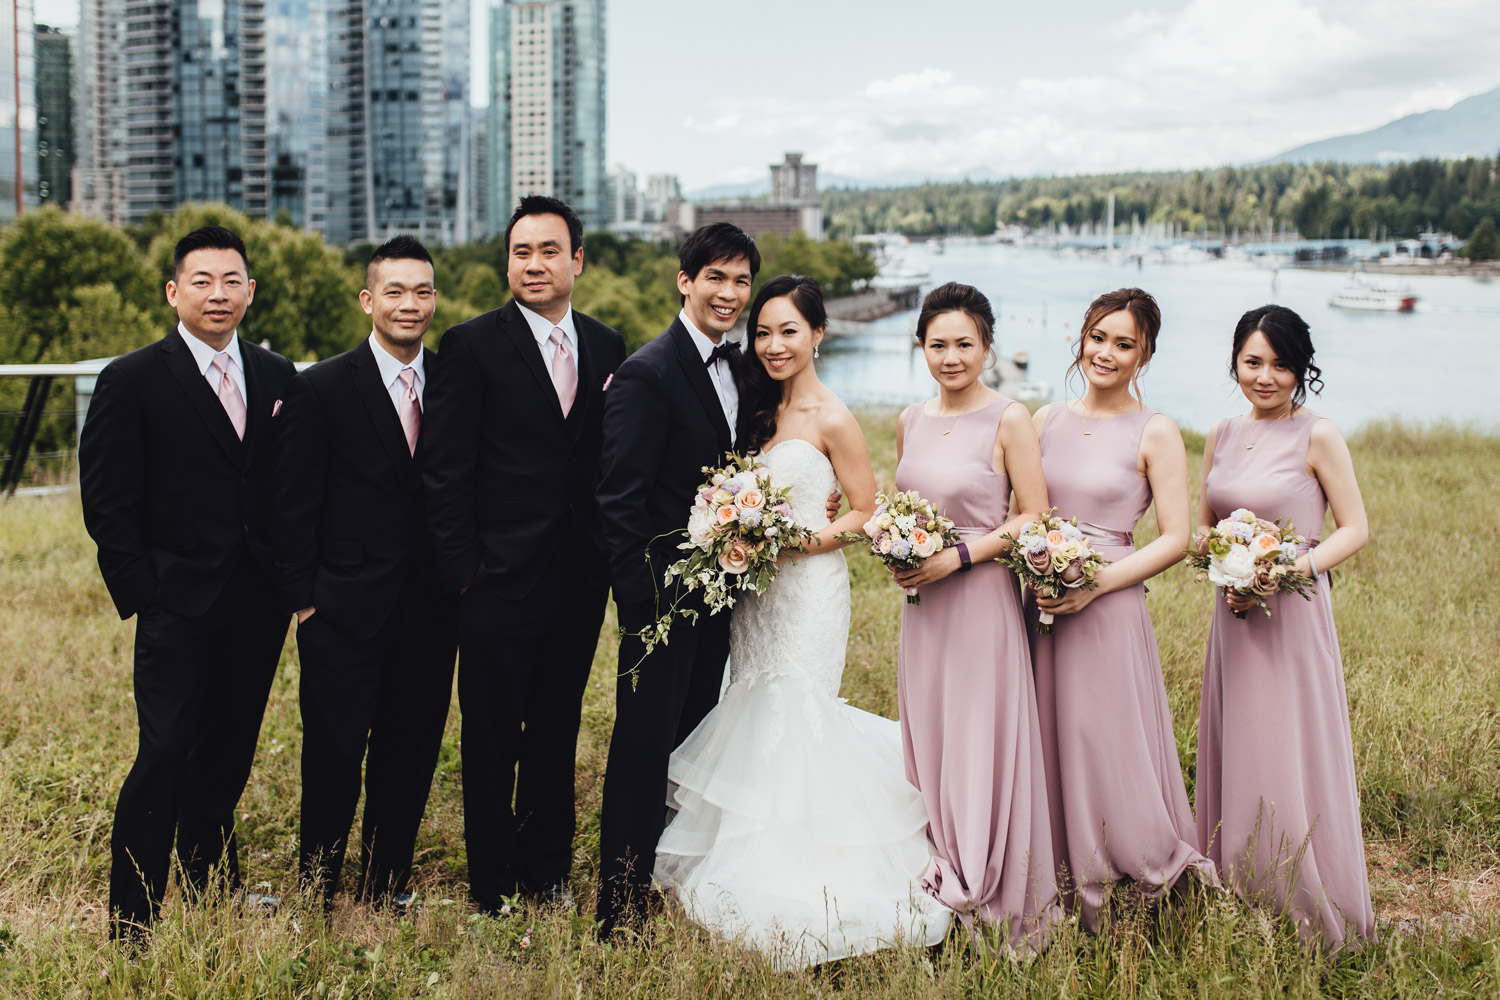 vancouver wedding photography at coal harbour bride groom portraits